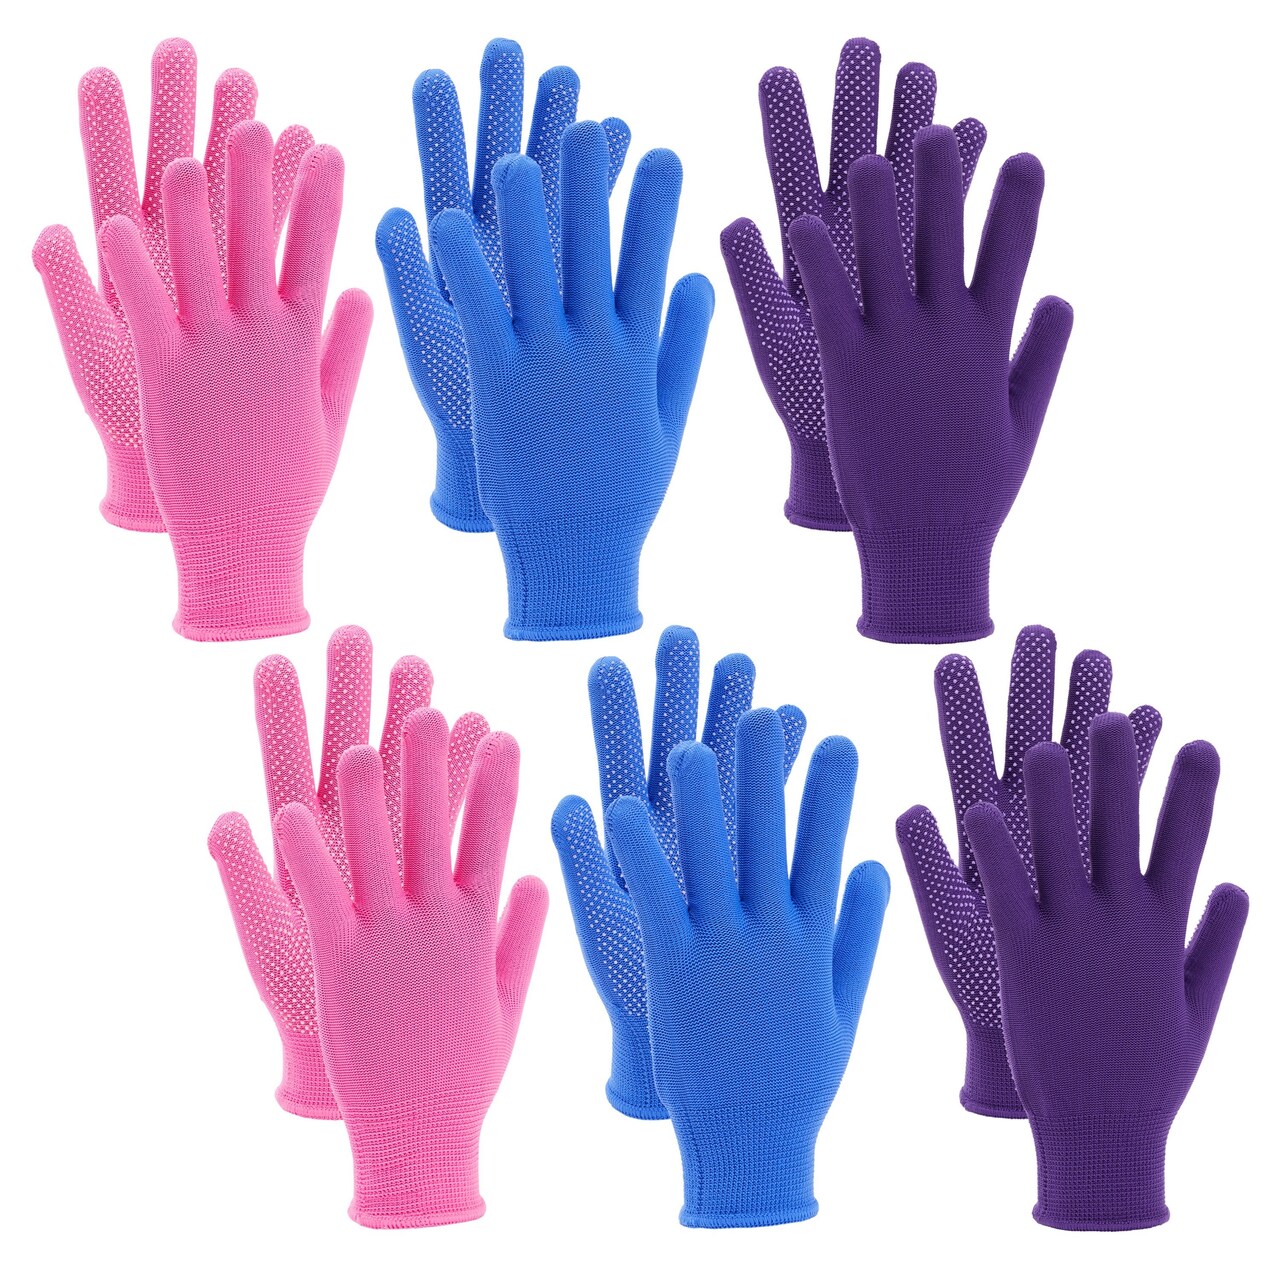 6 Pairs Women's Protective Gardening Gloves for Planting and